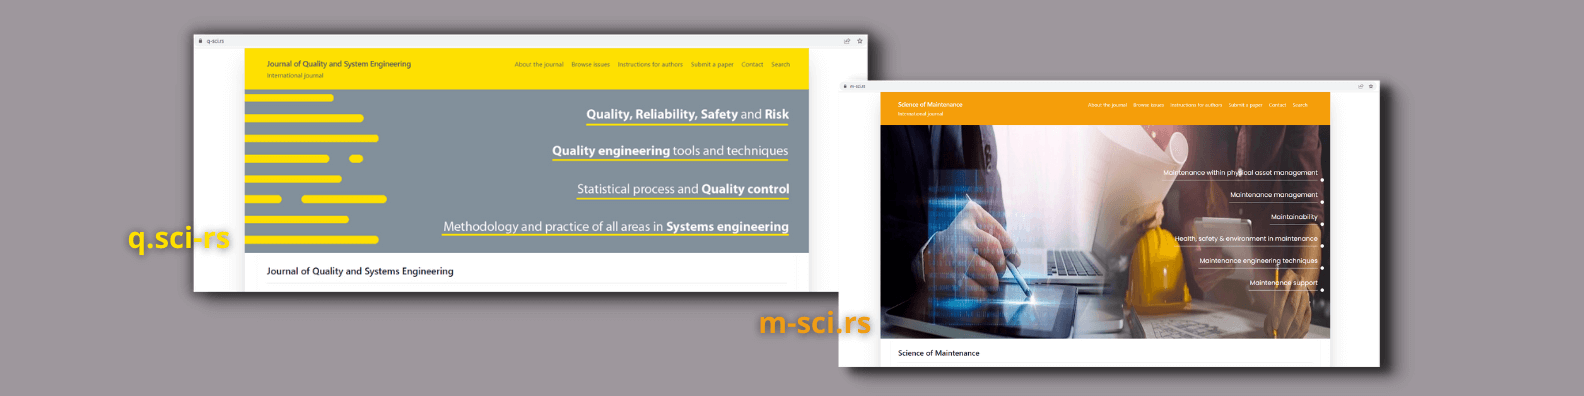 Websites of international scientific journals: q-sci.rs and m-sci.rs are created and launched